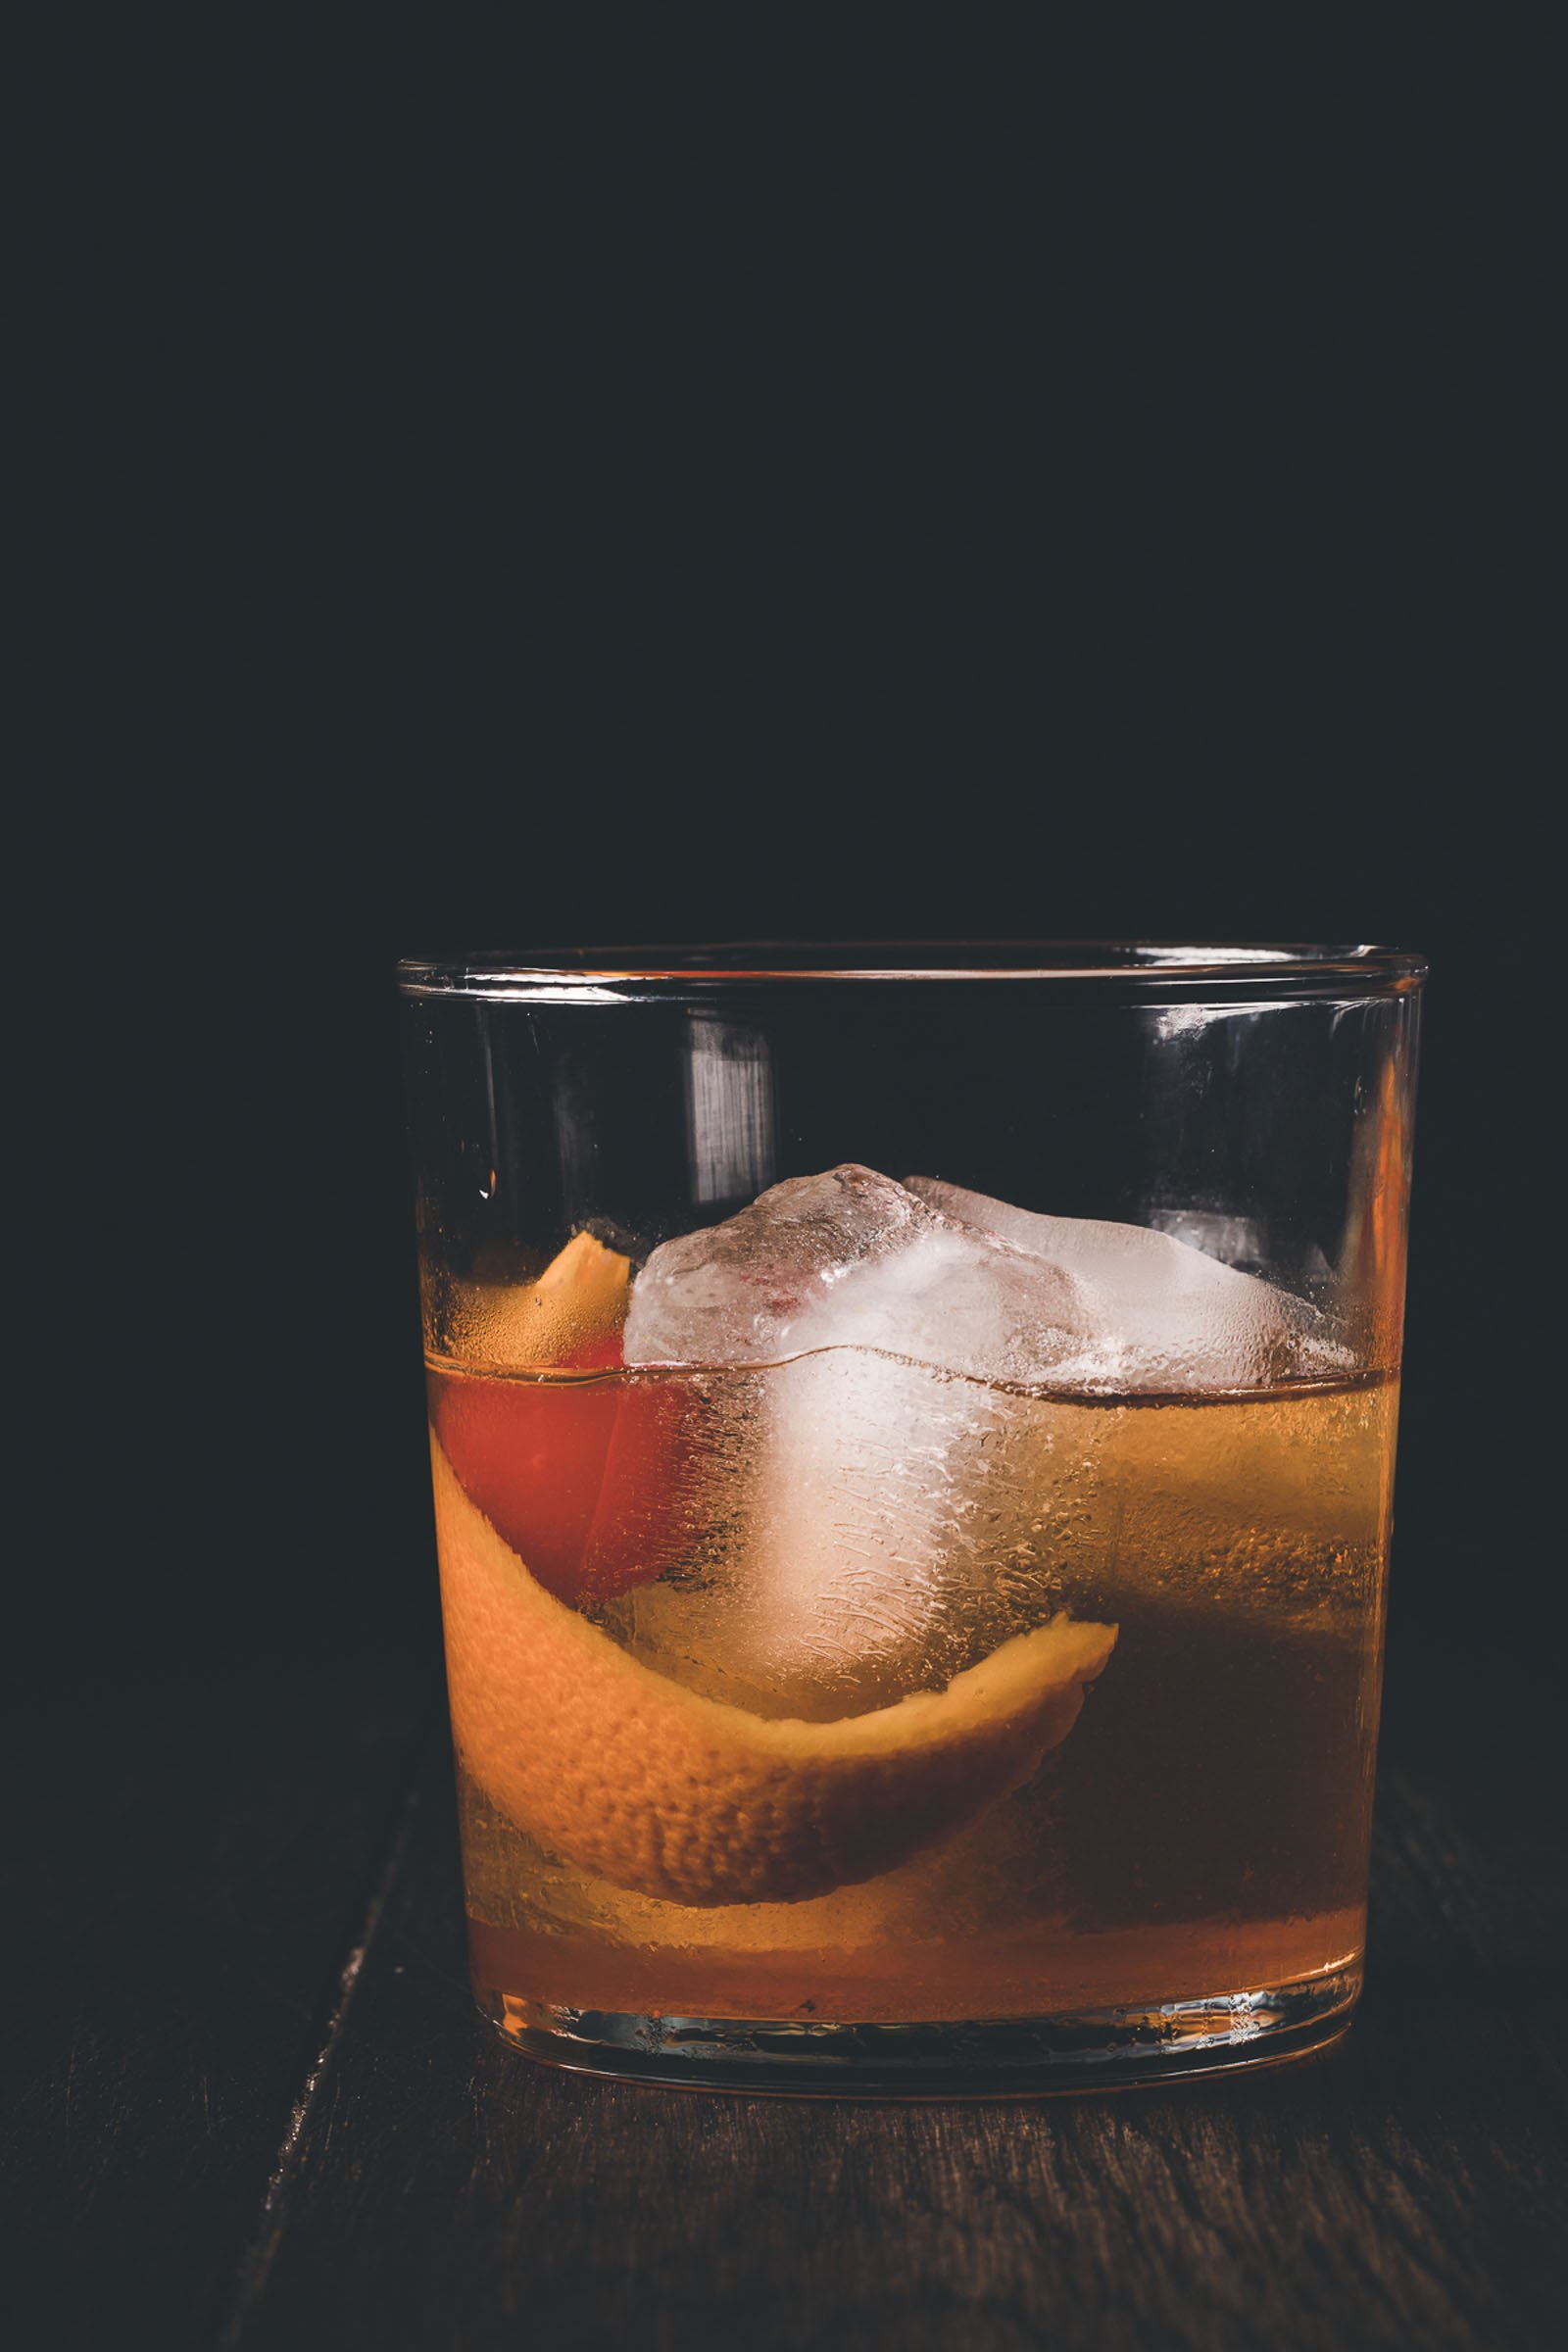 Smoked Old Fashioned Cocktail Kit with Orange Wood Smoked ICE